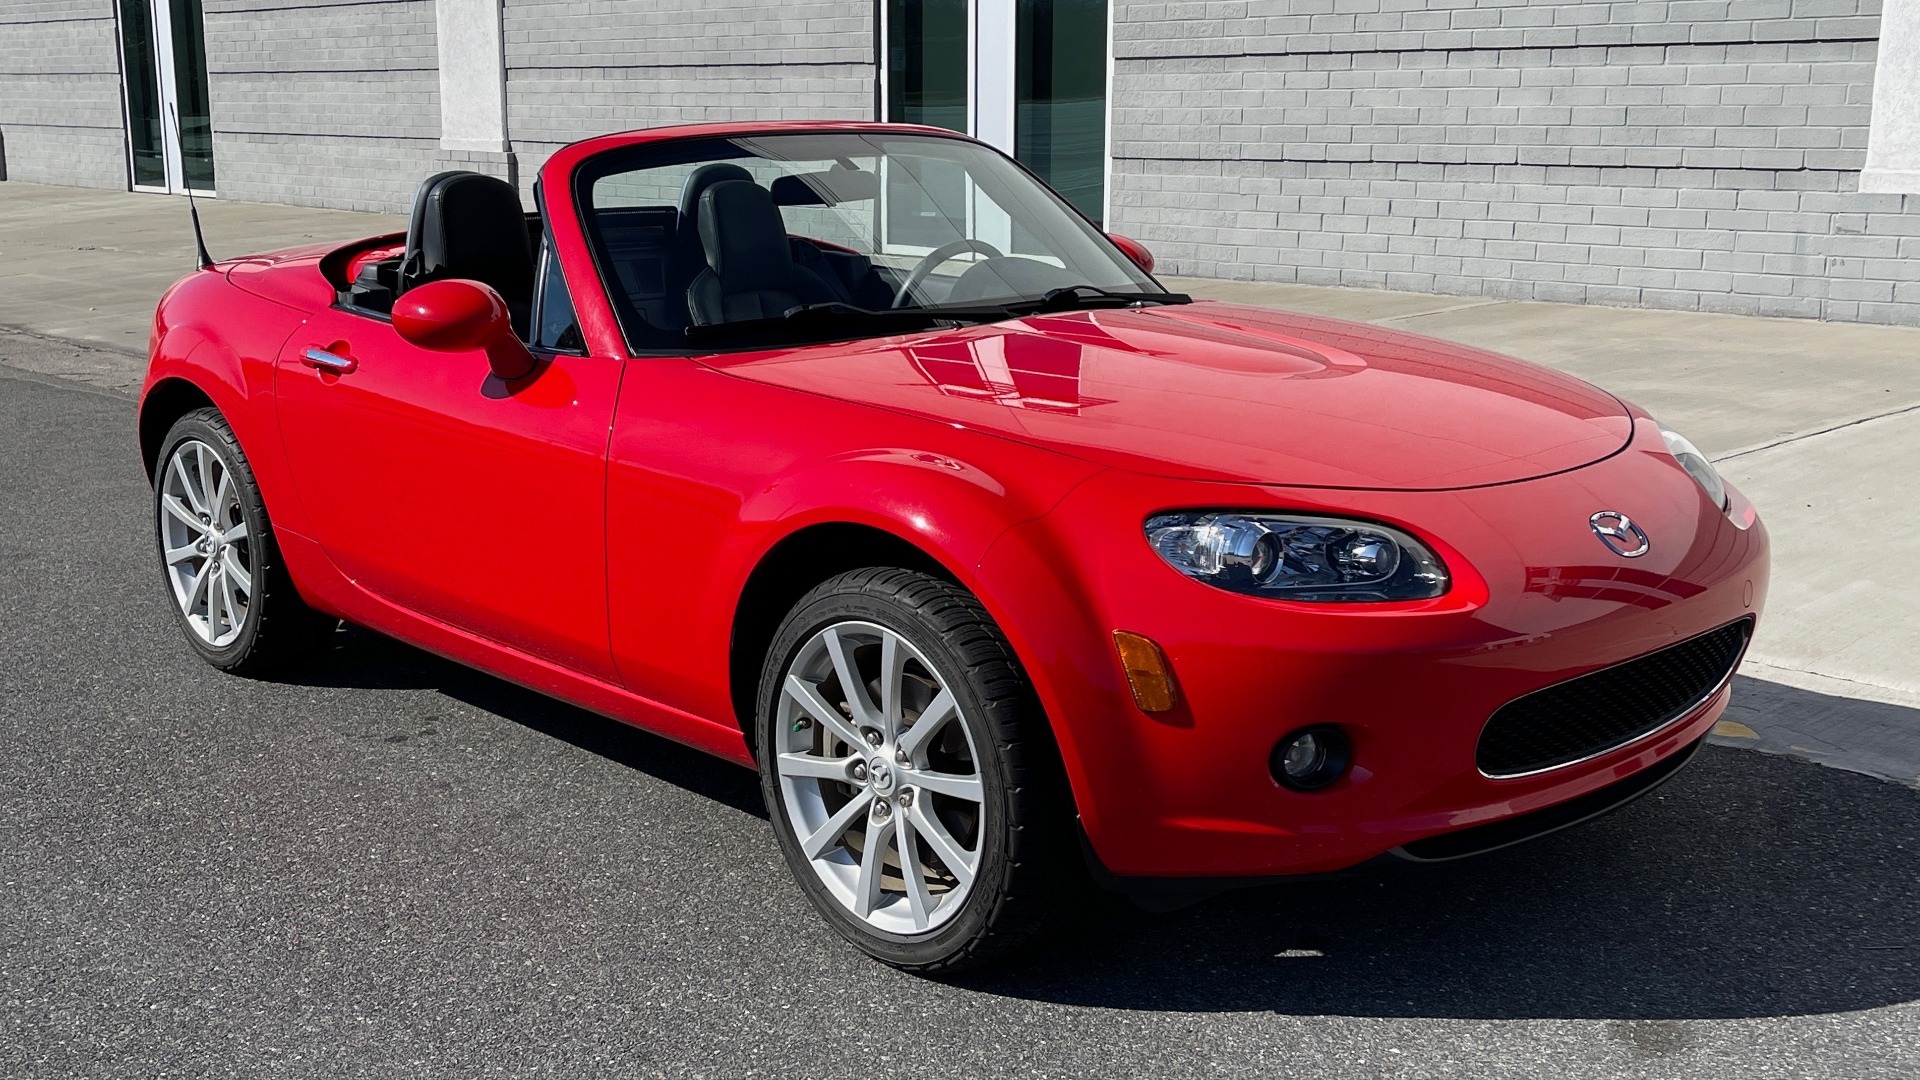 Used 2008 Mazda MX-5 MIATA GRAND TOURING / PRHT 2DR / MANUAL / 17IN ALLOY WHLS / LOW MILES for sale $20,995 at Formula Imports in Charlotte NC 28227 3